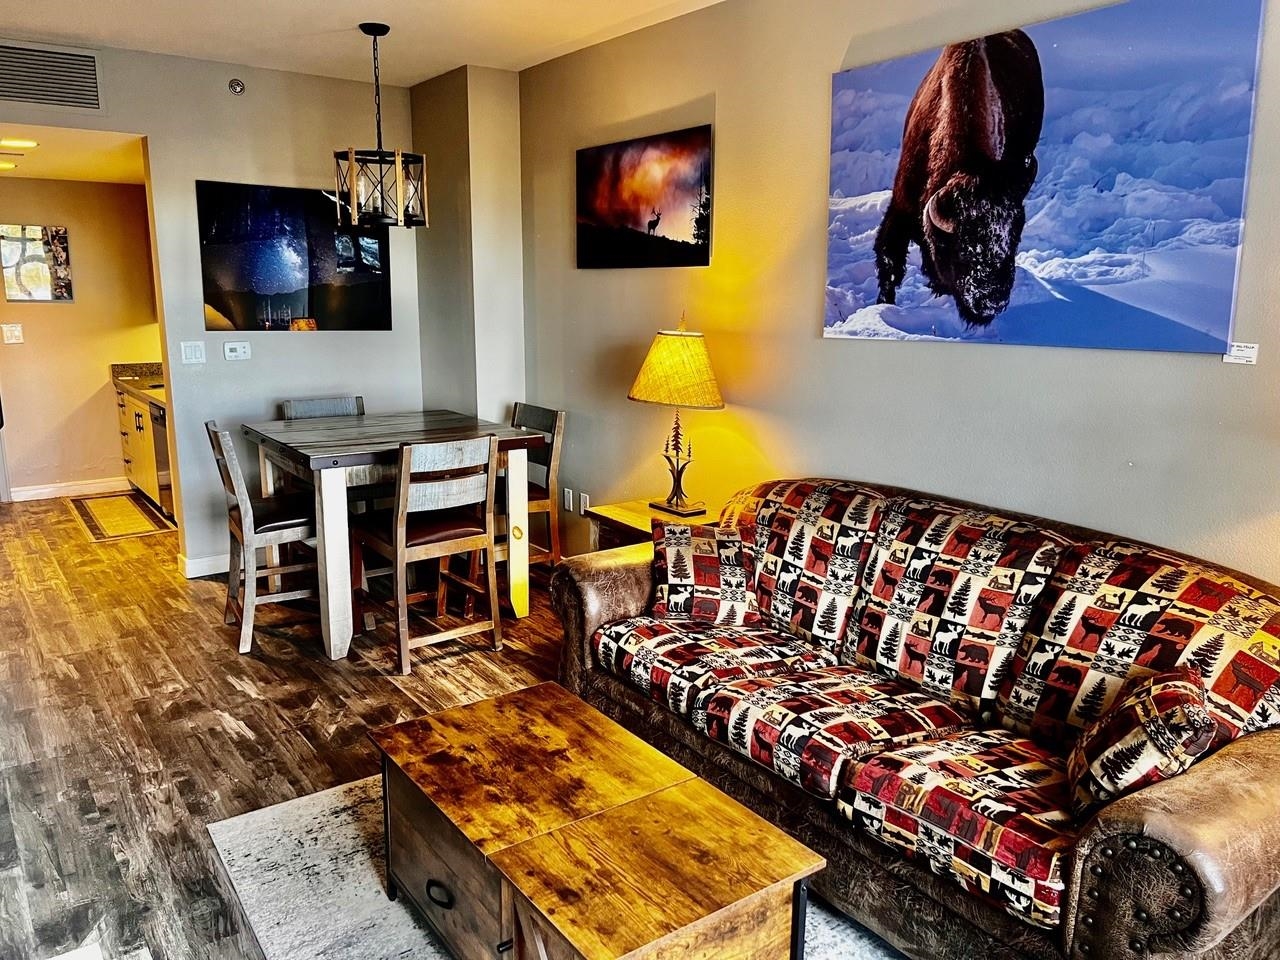 Westin Monache 1-Bedroom for sale!  This 2nd floor unit with views to the east has been tastefully updated to provide more modern décor while keeping the mountain theme.  The upgraded flooring, furnishings, and artwork make this a desired rental for visitors looking for a classier stay with ideal location and amenities.  The Westin in Mammoth is known for its excellent location. Being just steps away from the Village allows owners and guests to have quick and convenient access to a variety of restaurants, shopping, events, services, transportation, and the Village Gondola which takes skiers up to the newly remodeled Canyon Lodge.  Westin amenities are top notch with a year-round heated pool, multiple outdoor hot tubs, a workout/weight room, private ski lockers, valet service, 24-hour front desk staff, underground parking, conference rooms, kid’s club, free shuttle service, and the Whitebark Restaurant and Bar.  This unit is being sold fully furnished to be able to start using and renting it immediately upon taking ownership.